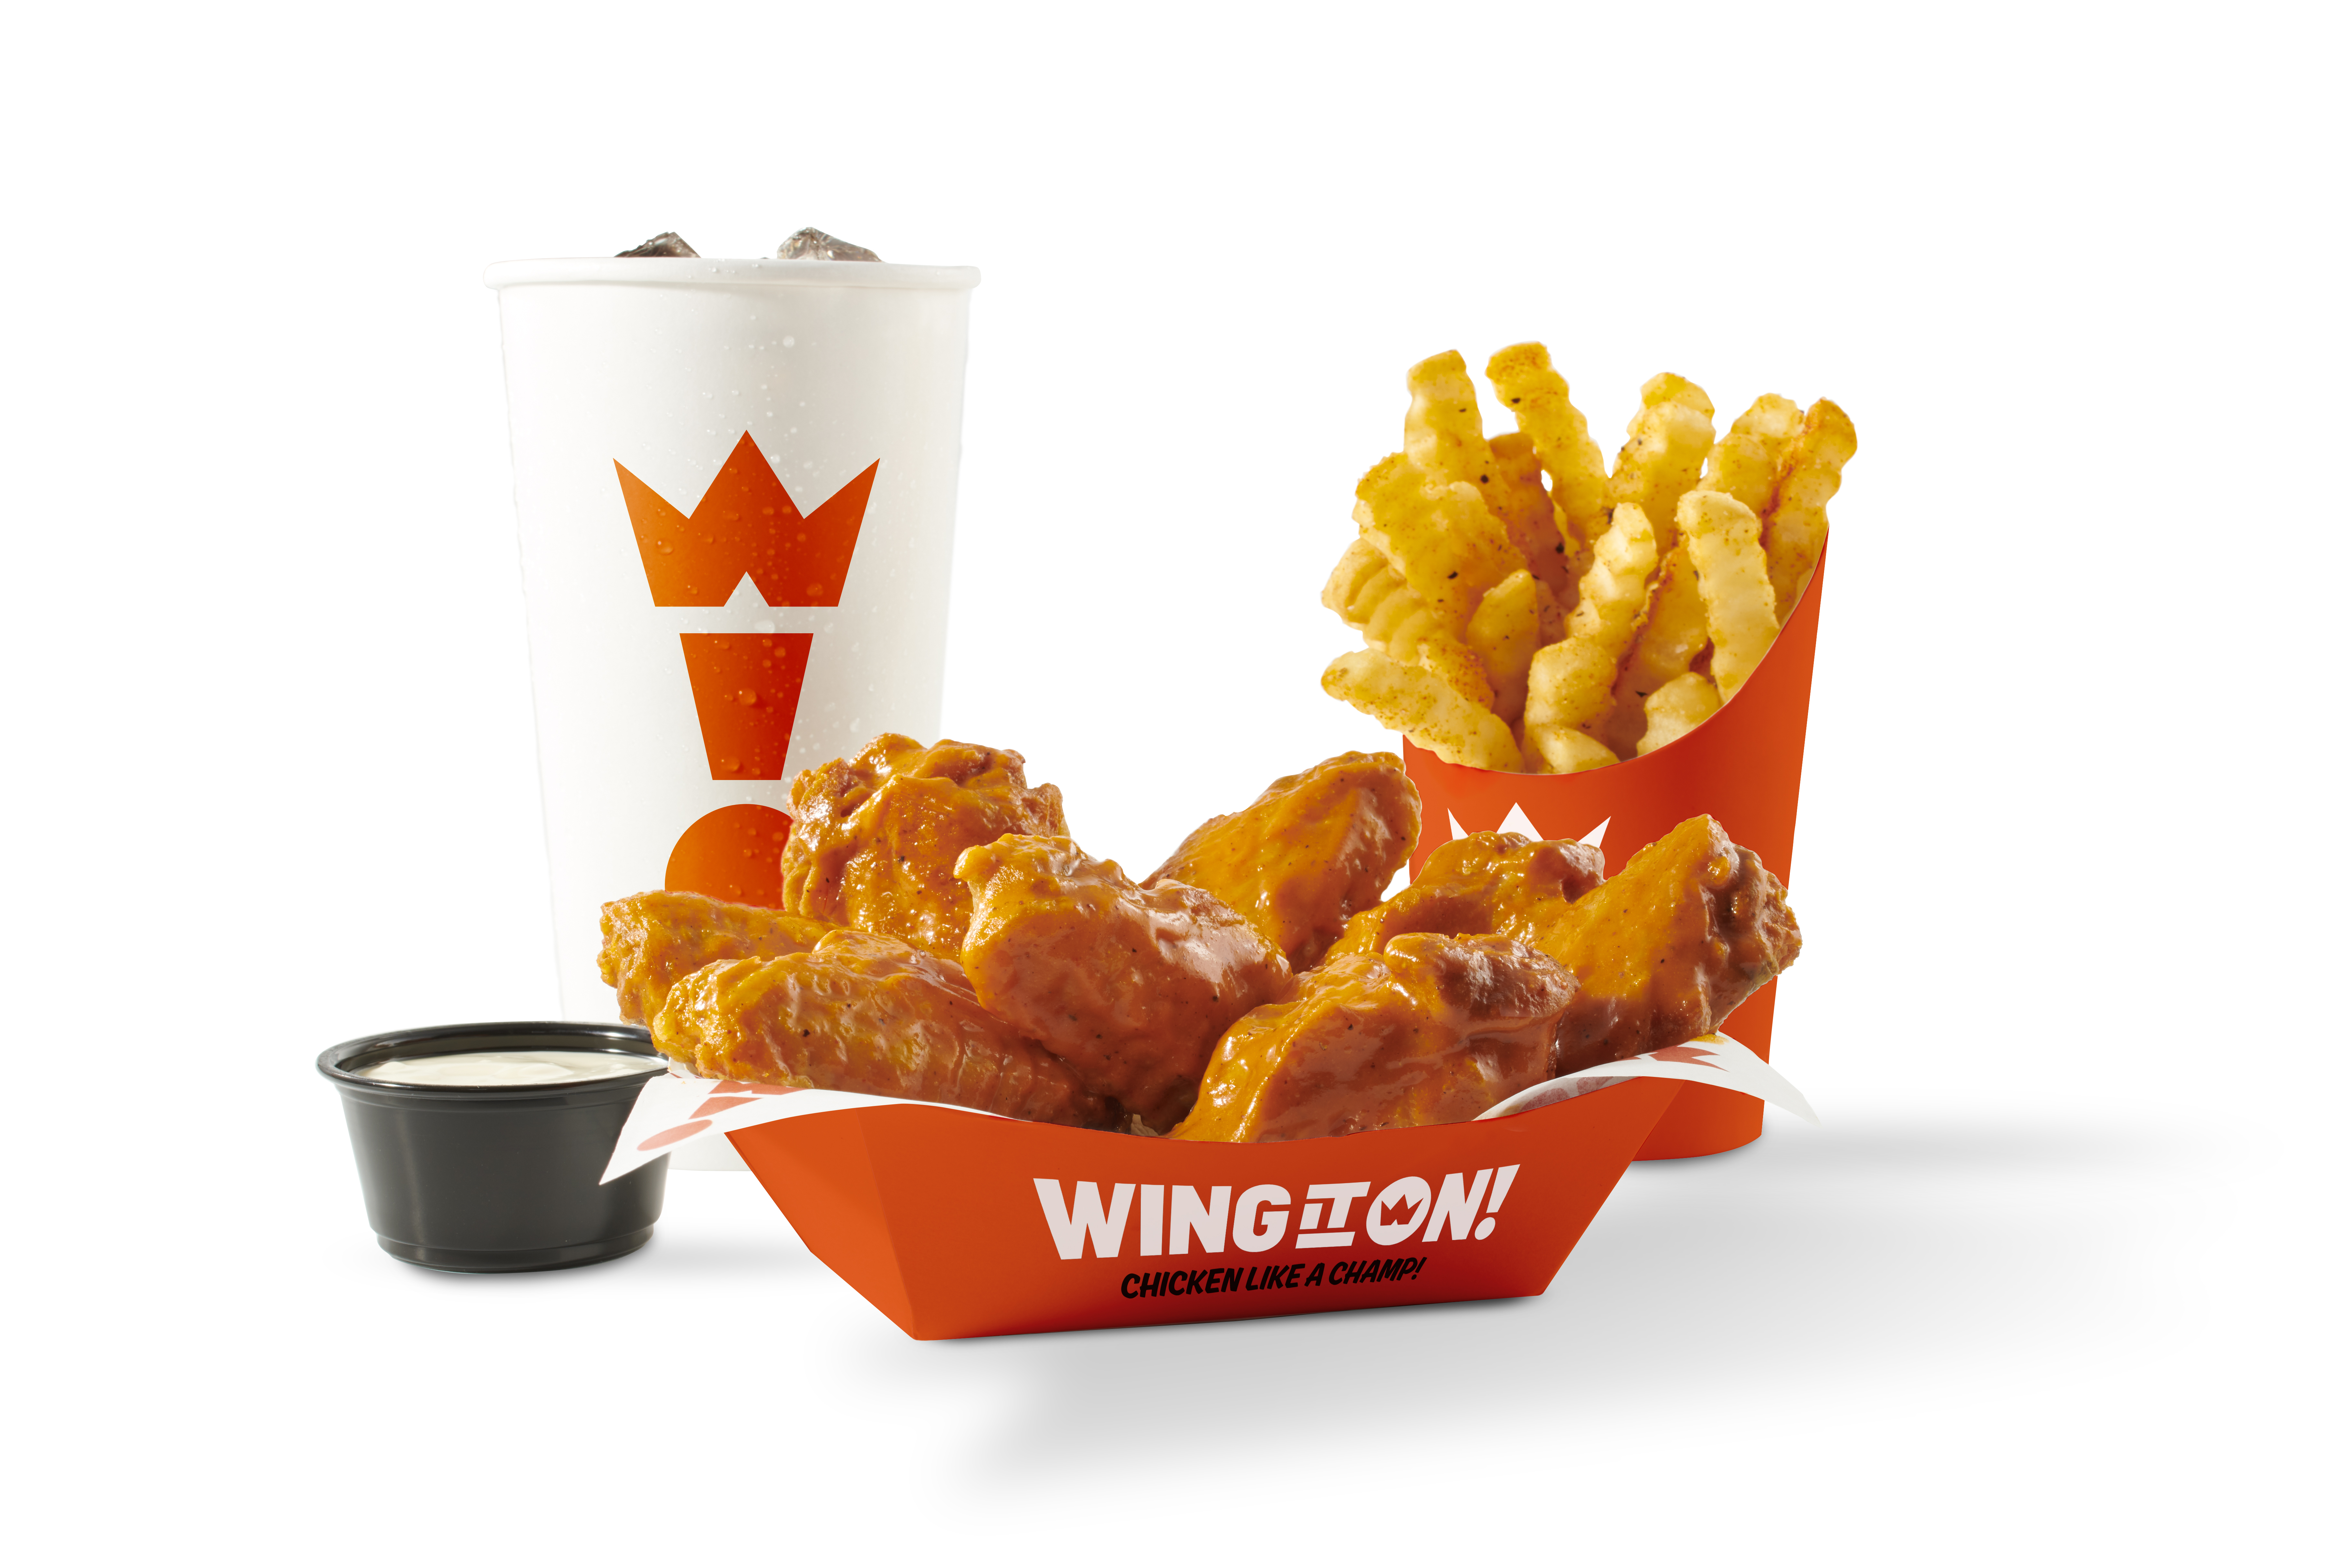 Wing It On!'s award-winning Buffalo sauce is ranked #1 in the nation.